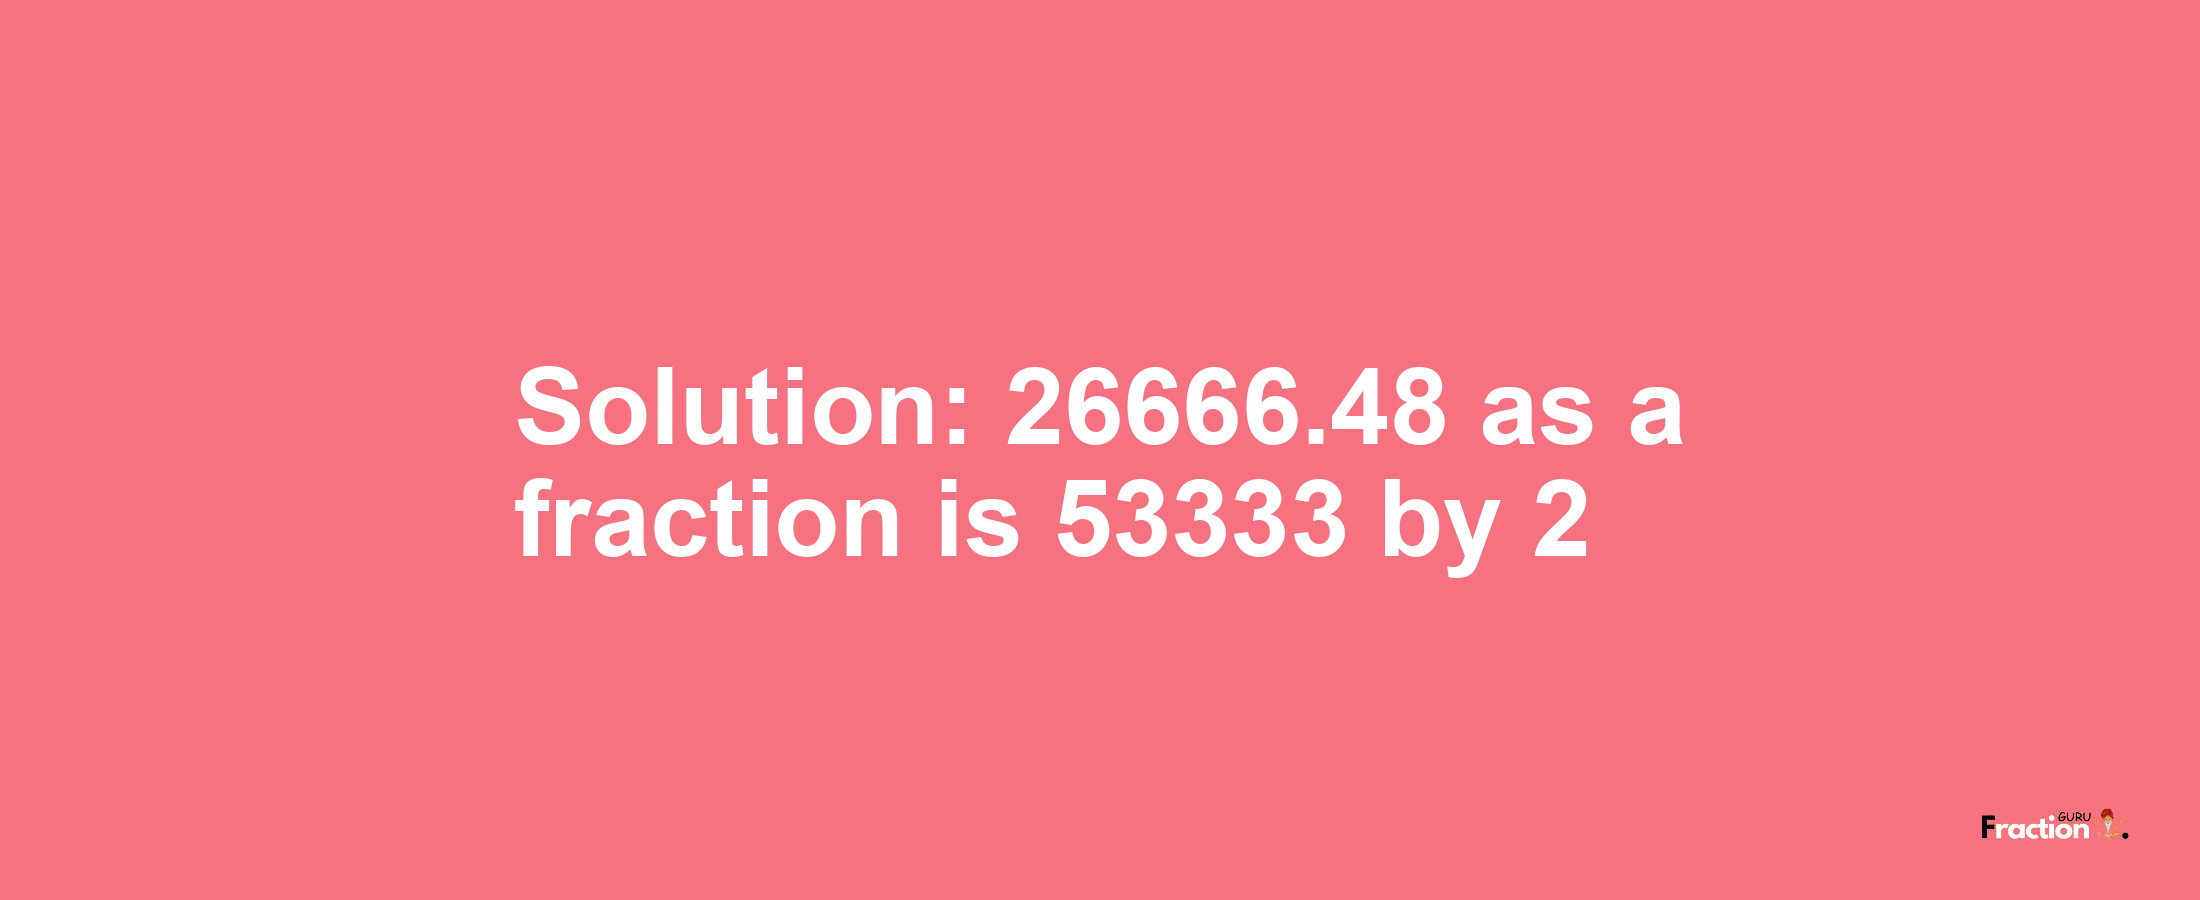 Solution:26666.48 as a fraction is 53333/2